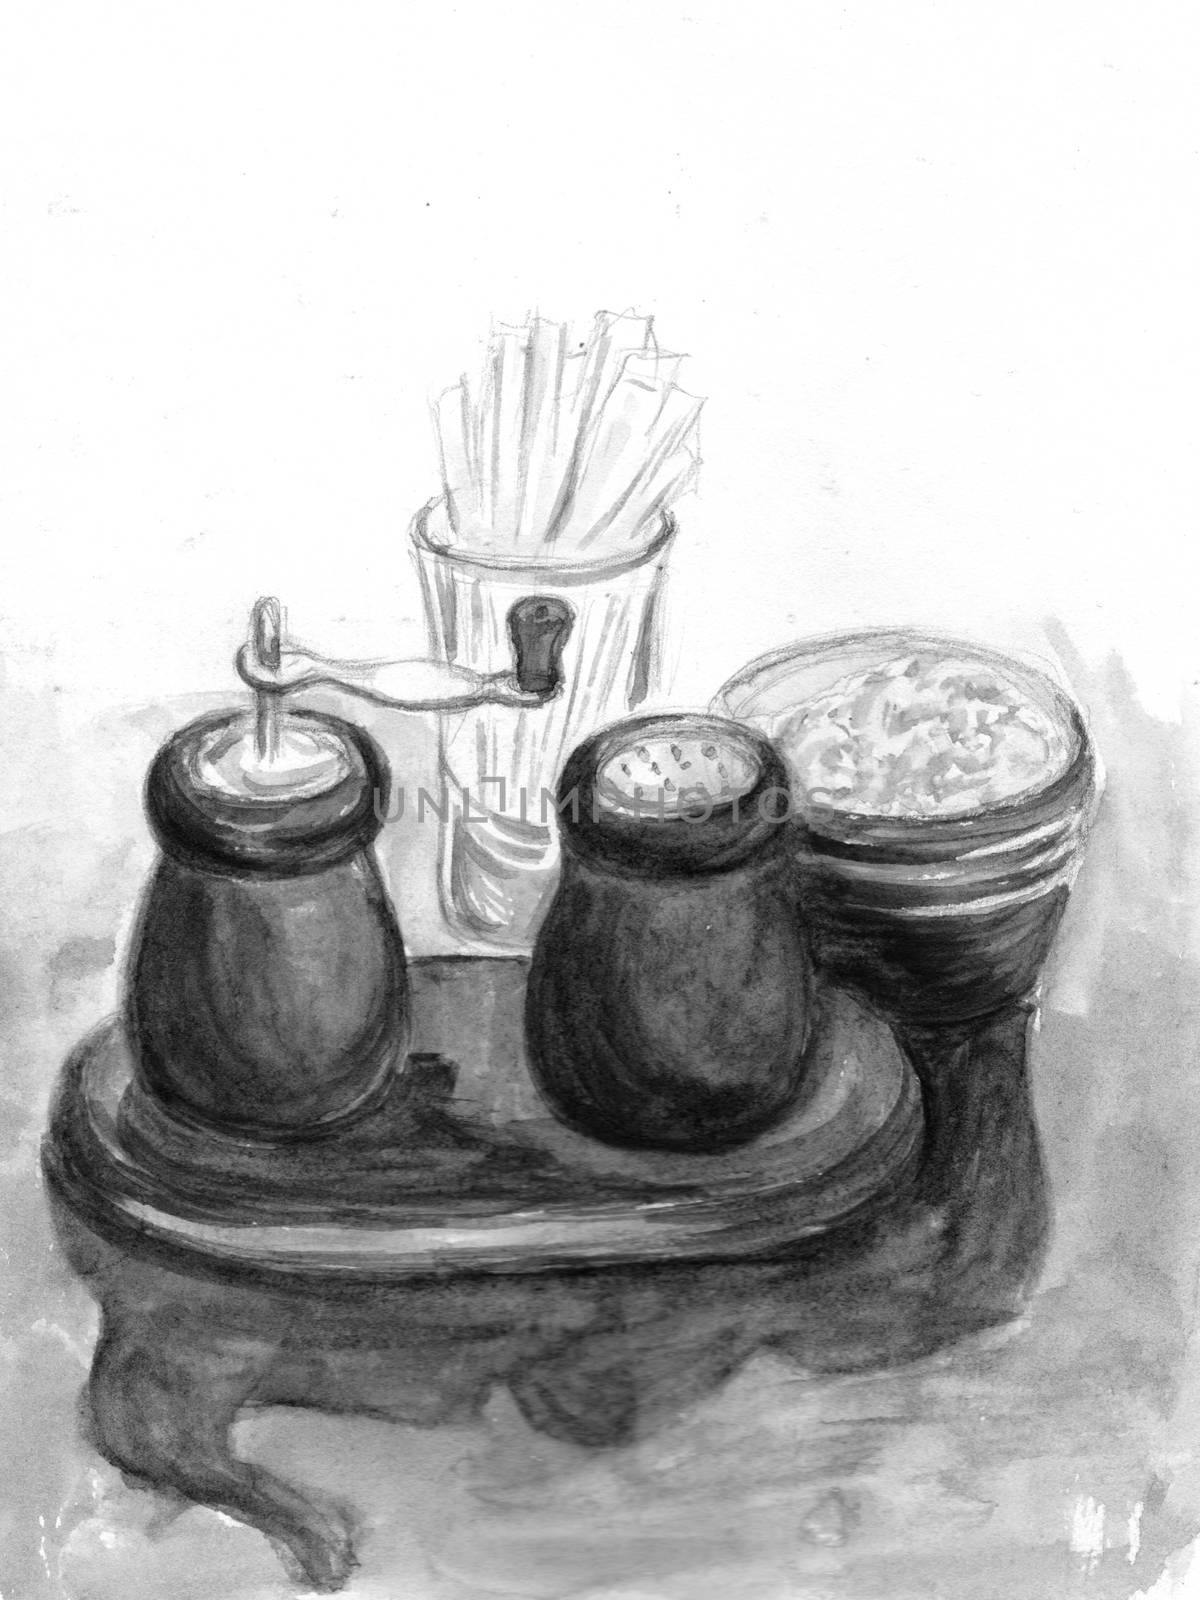 Salt and pepper shakers on table in cafe. Watercolor illustration. Hand-drawn sketch. Gray, black and white monochrome colors.